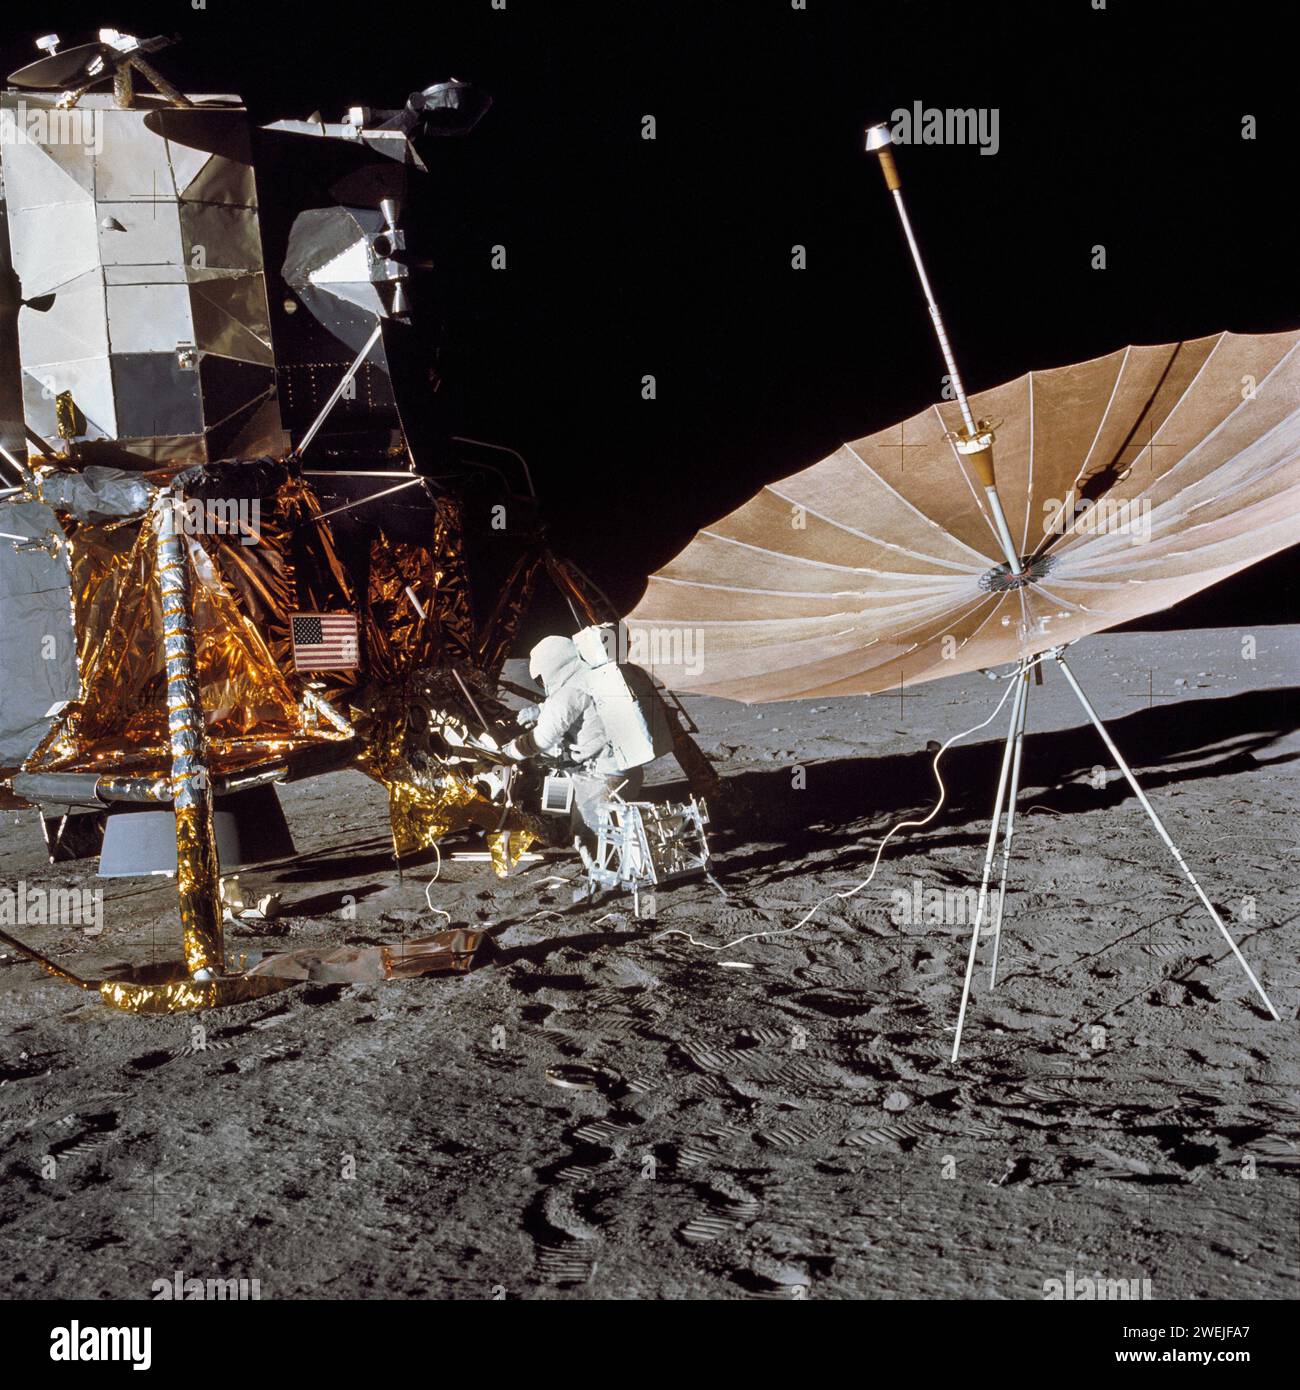 American astronaut Charles Conrad Jr., commander of Apollo 12 lunar landing mission, standing at Module Equipment Stowage Assembly on Lunar Module  following first Apollo 12 extravehicular activity on lunar surface, NASA, November 19, 1969 Stock Photo